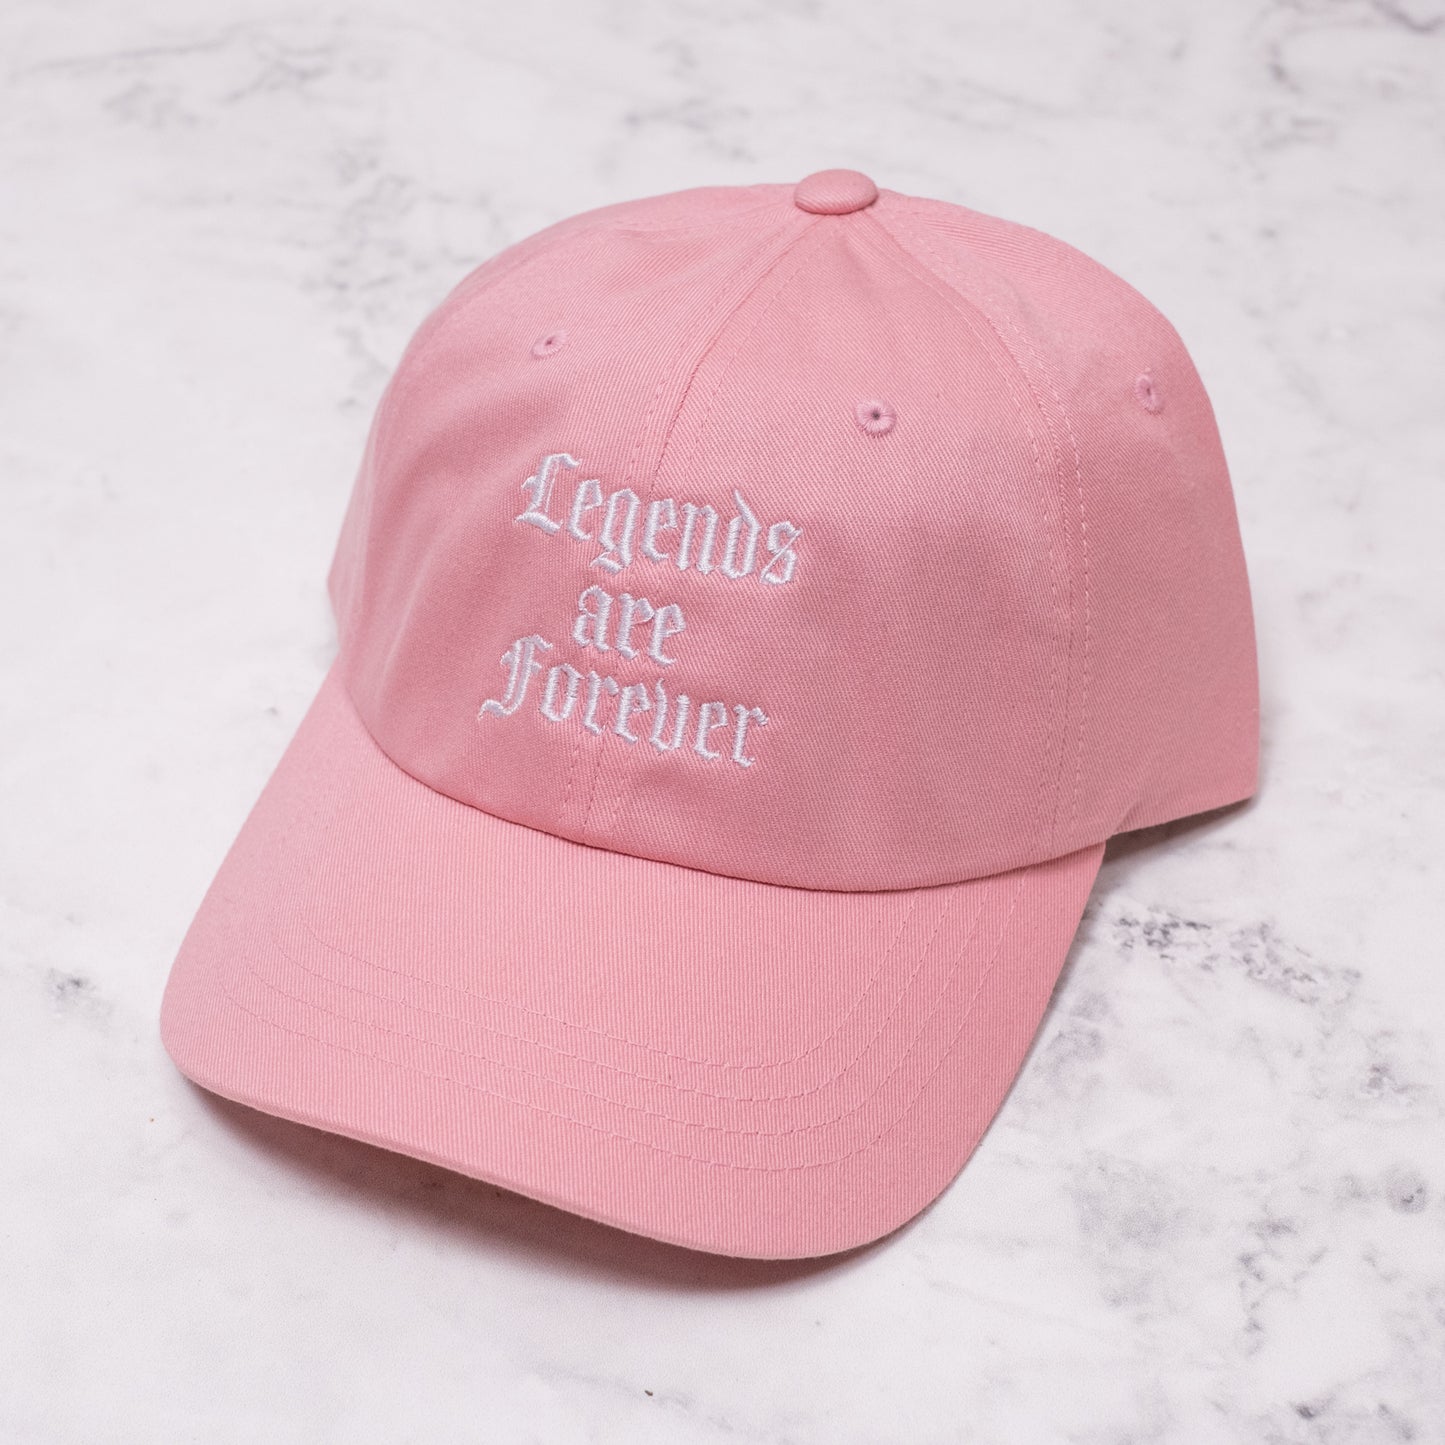 Legends are Forever Dad Hat